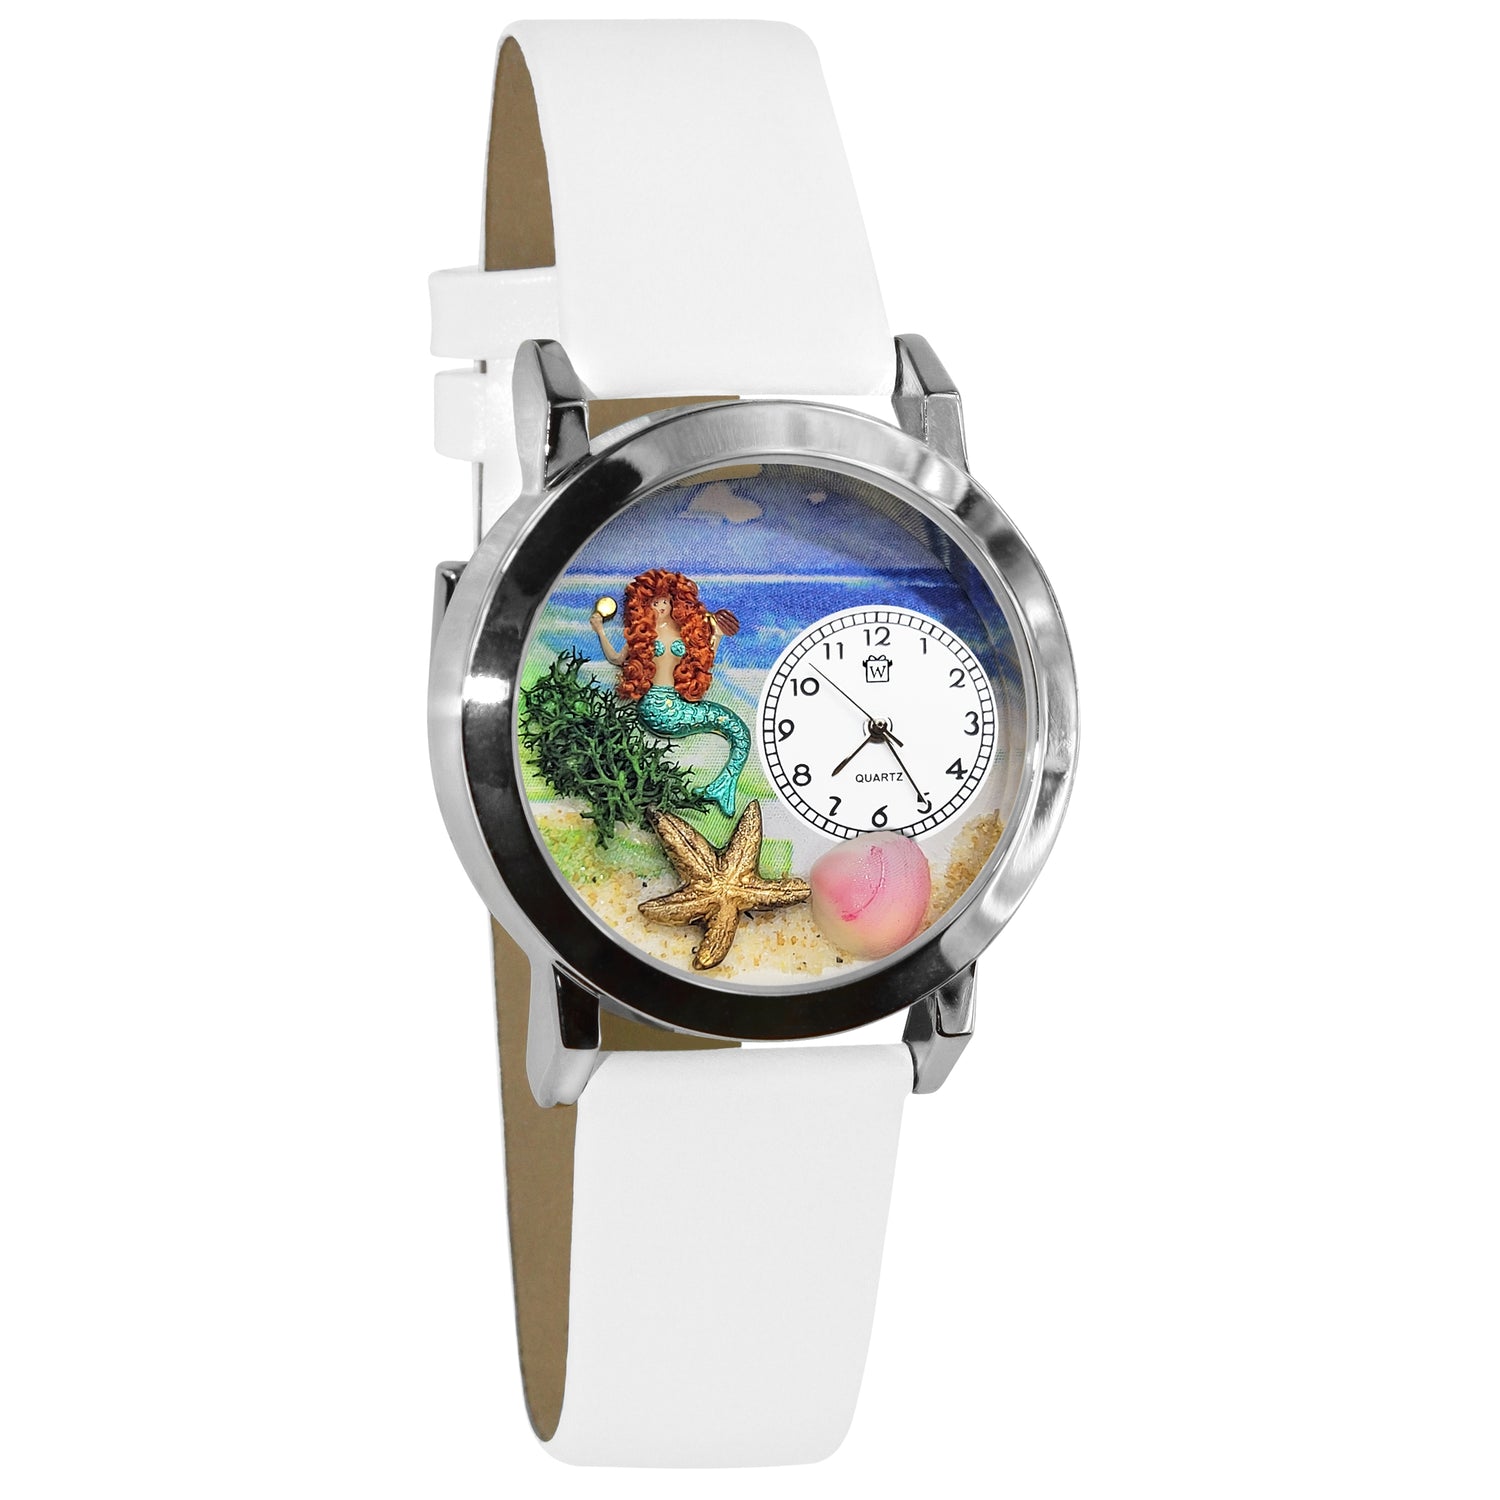 Whimsical Gifts | Mermaid 3D Watch Small Style | Handmade in USA | Fantasy & Mystical |  | Novelty Unique Fun Miniatures Gift | Silver Finish White Leather Watch Band